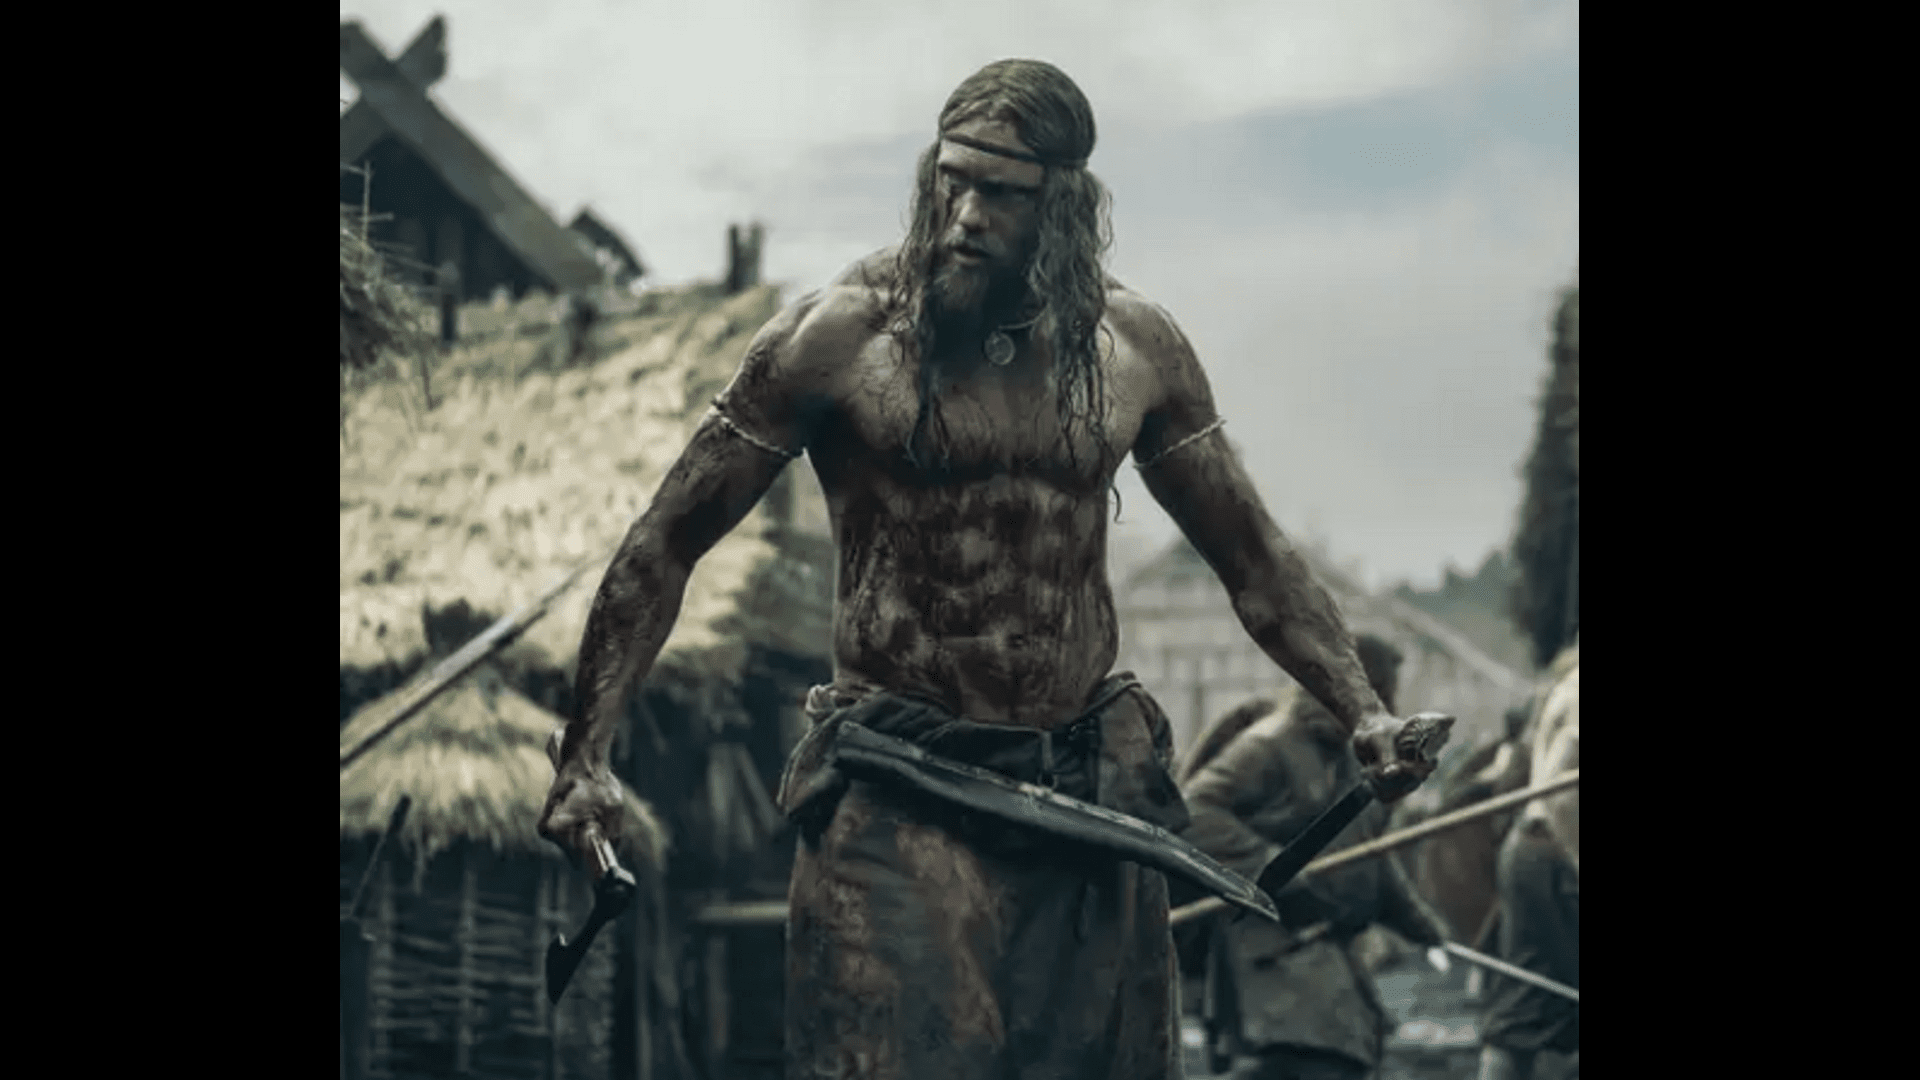 alexander-skarsgard-gained-9-kilograms-for-the-role-of-a-viking-in-the-film-northman